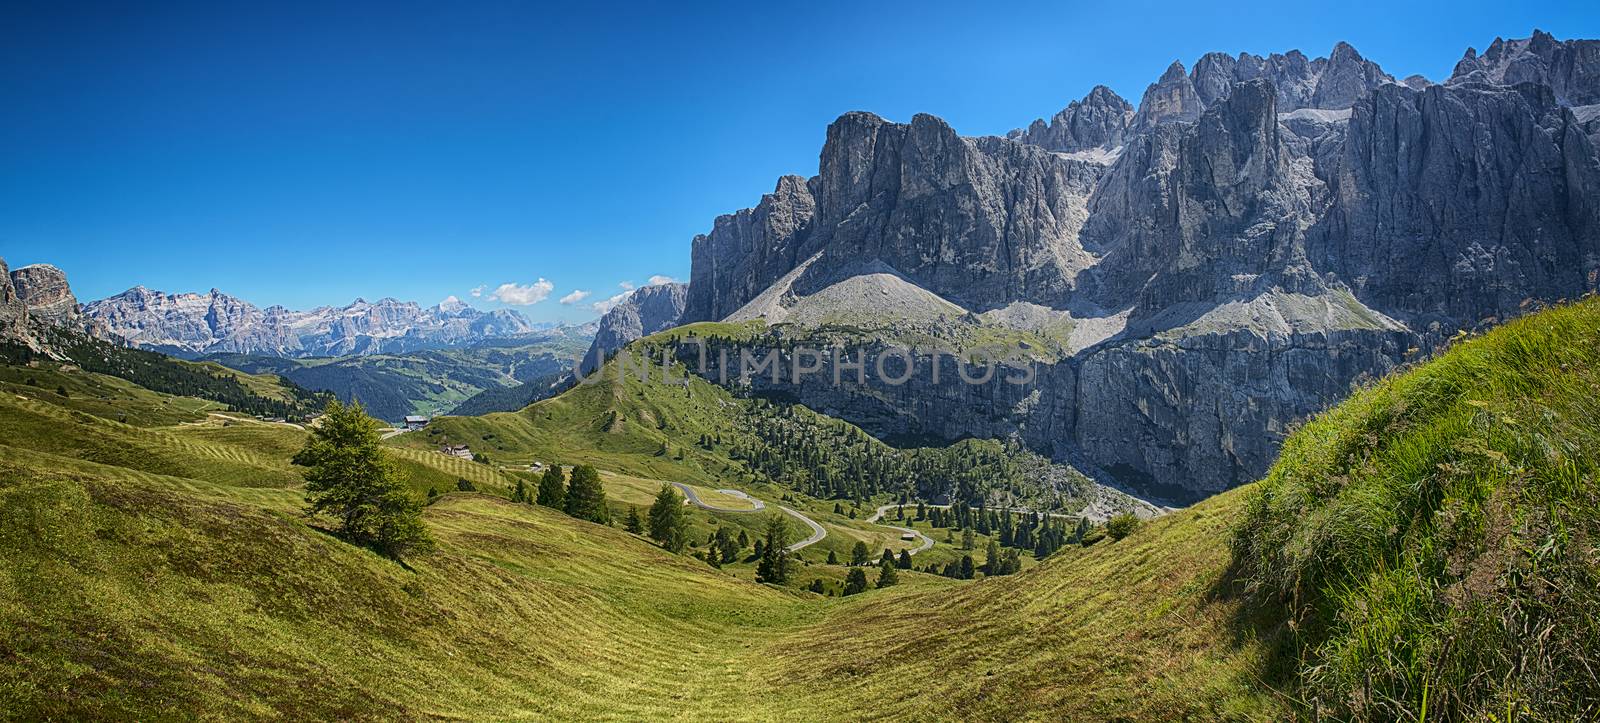 Panoramic view from Dantercepies on the Sella Group and Mountains of Alta Badia, Dolomites - Trentino-Alto Adige, Italy